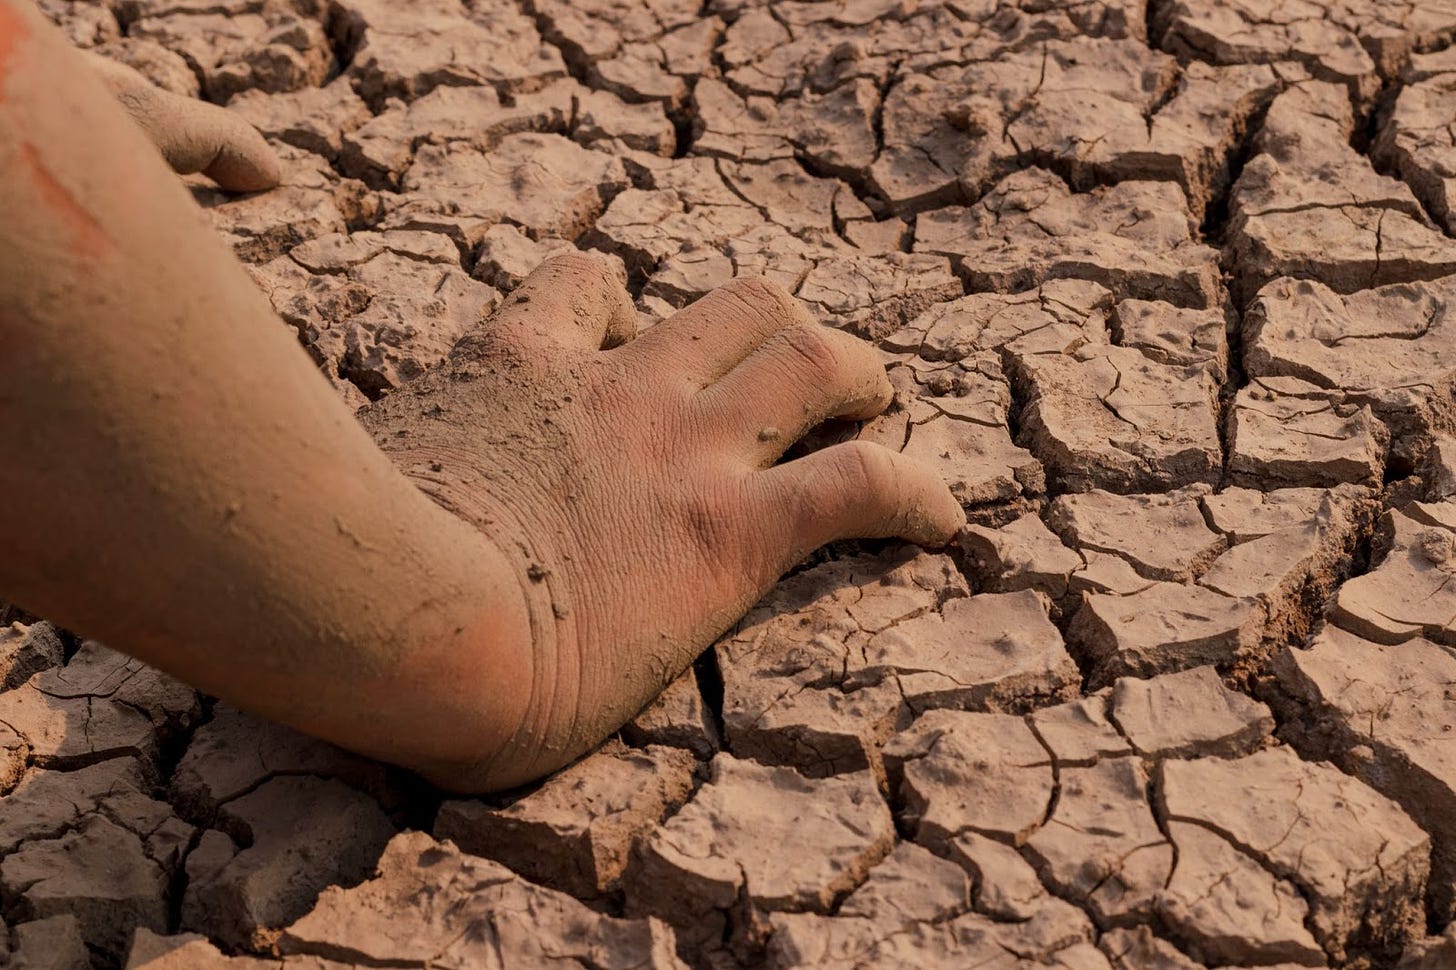 Dirty child's hand in a parched desert